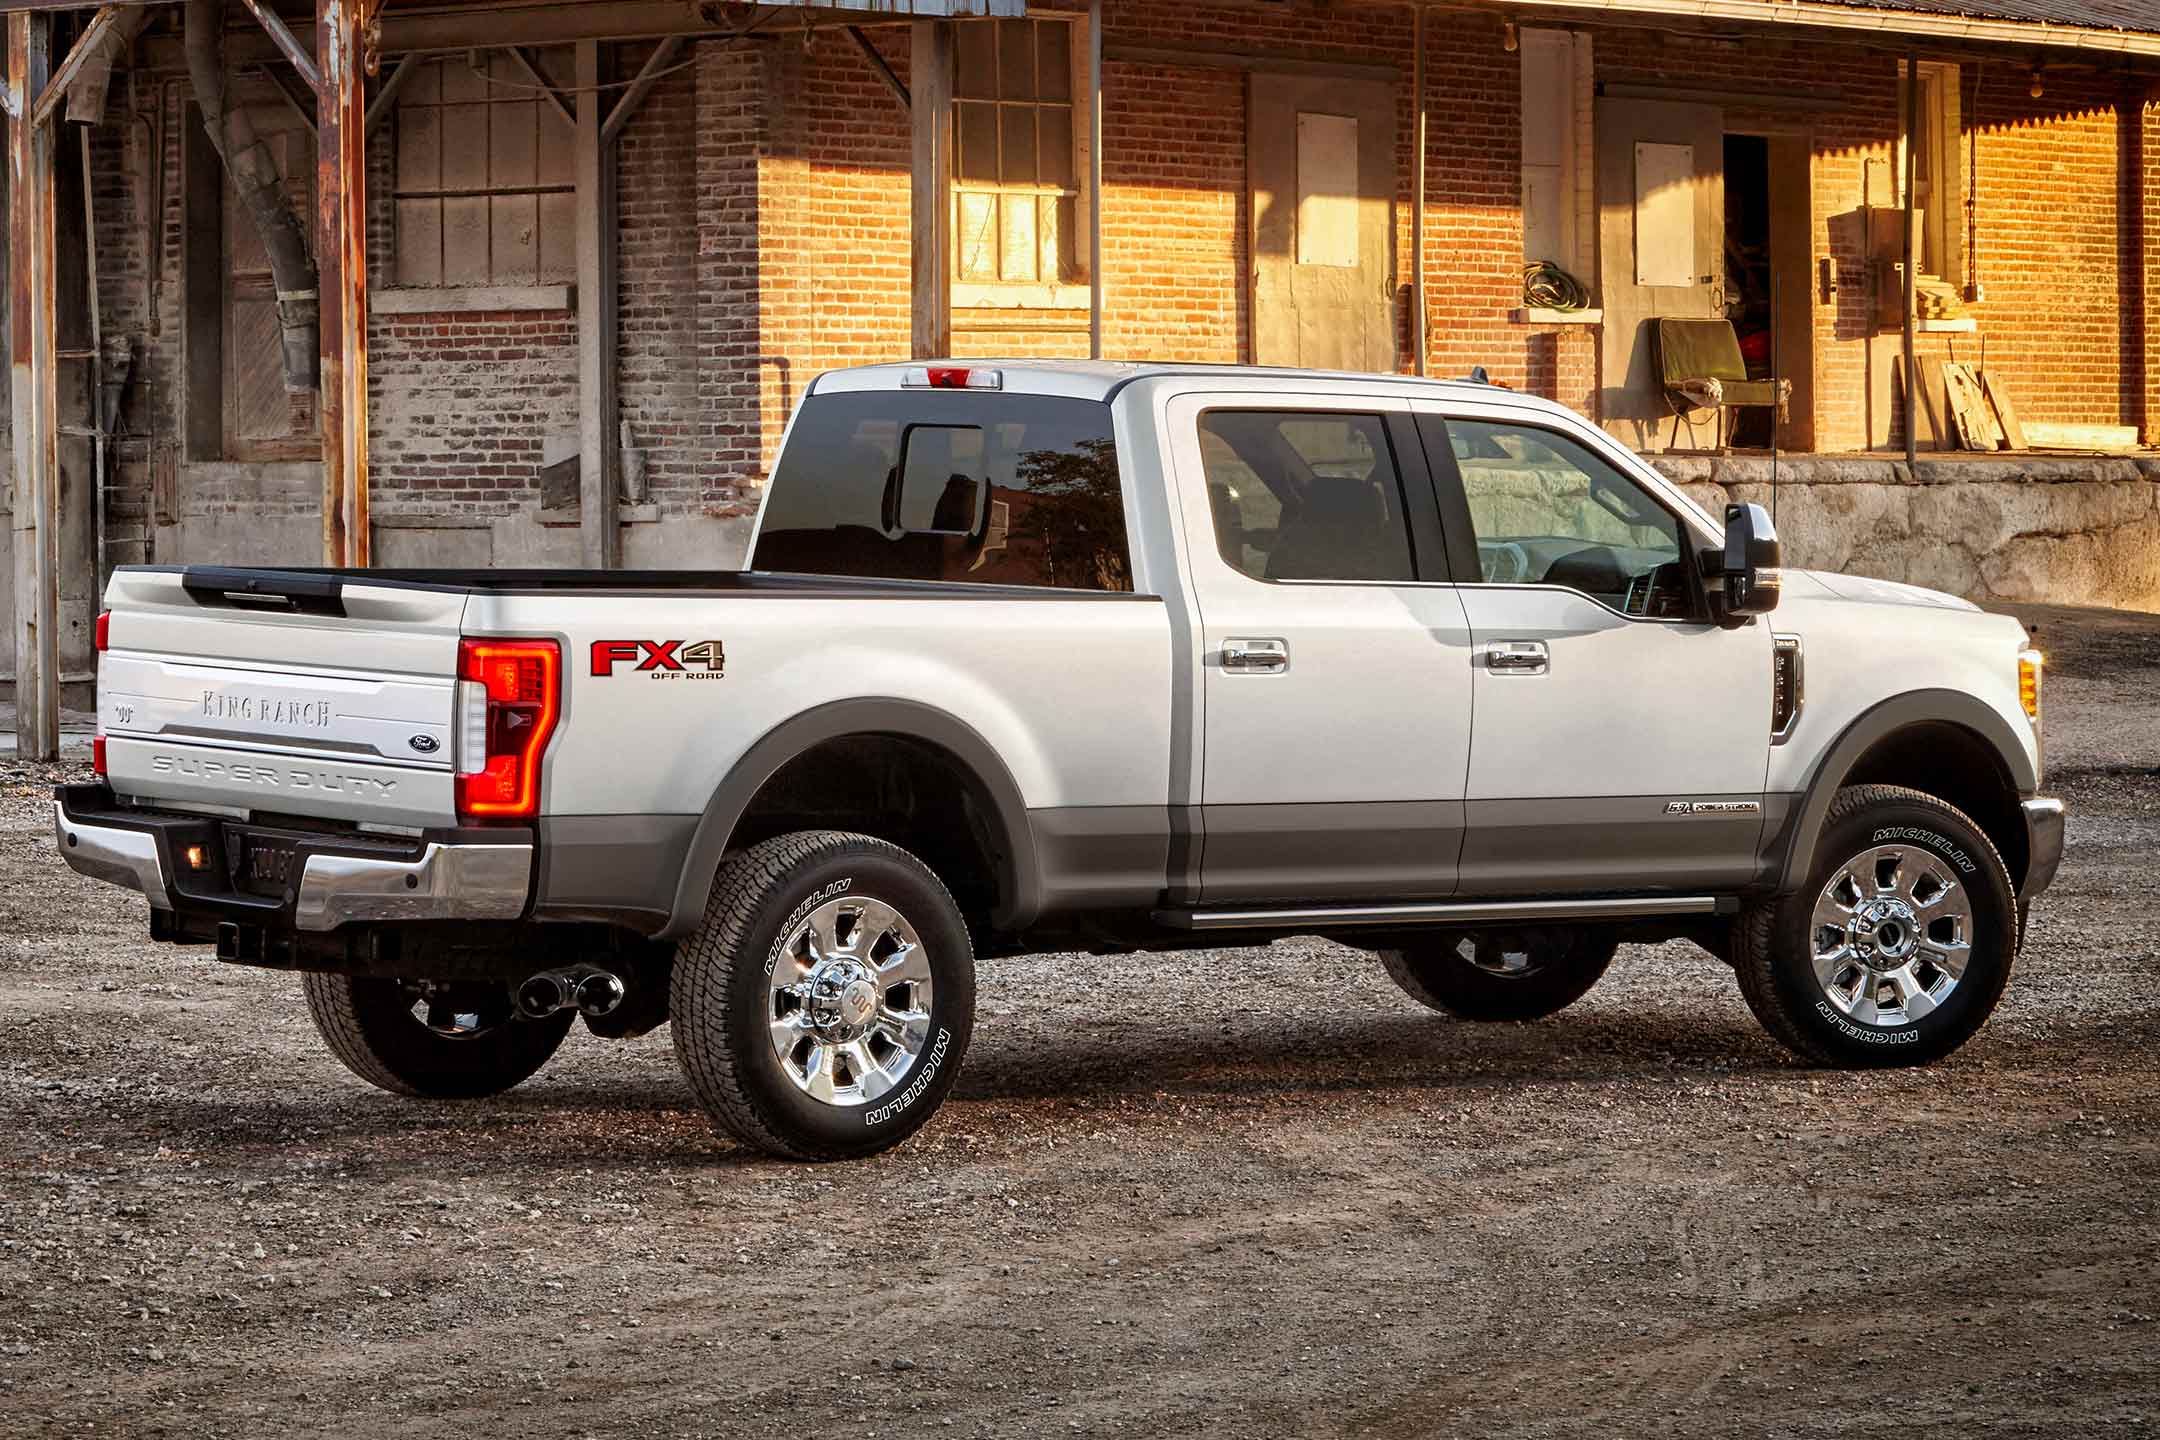 F-350 Super Duty Valve Stems Issue Brings Lawsuit to Ford